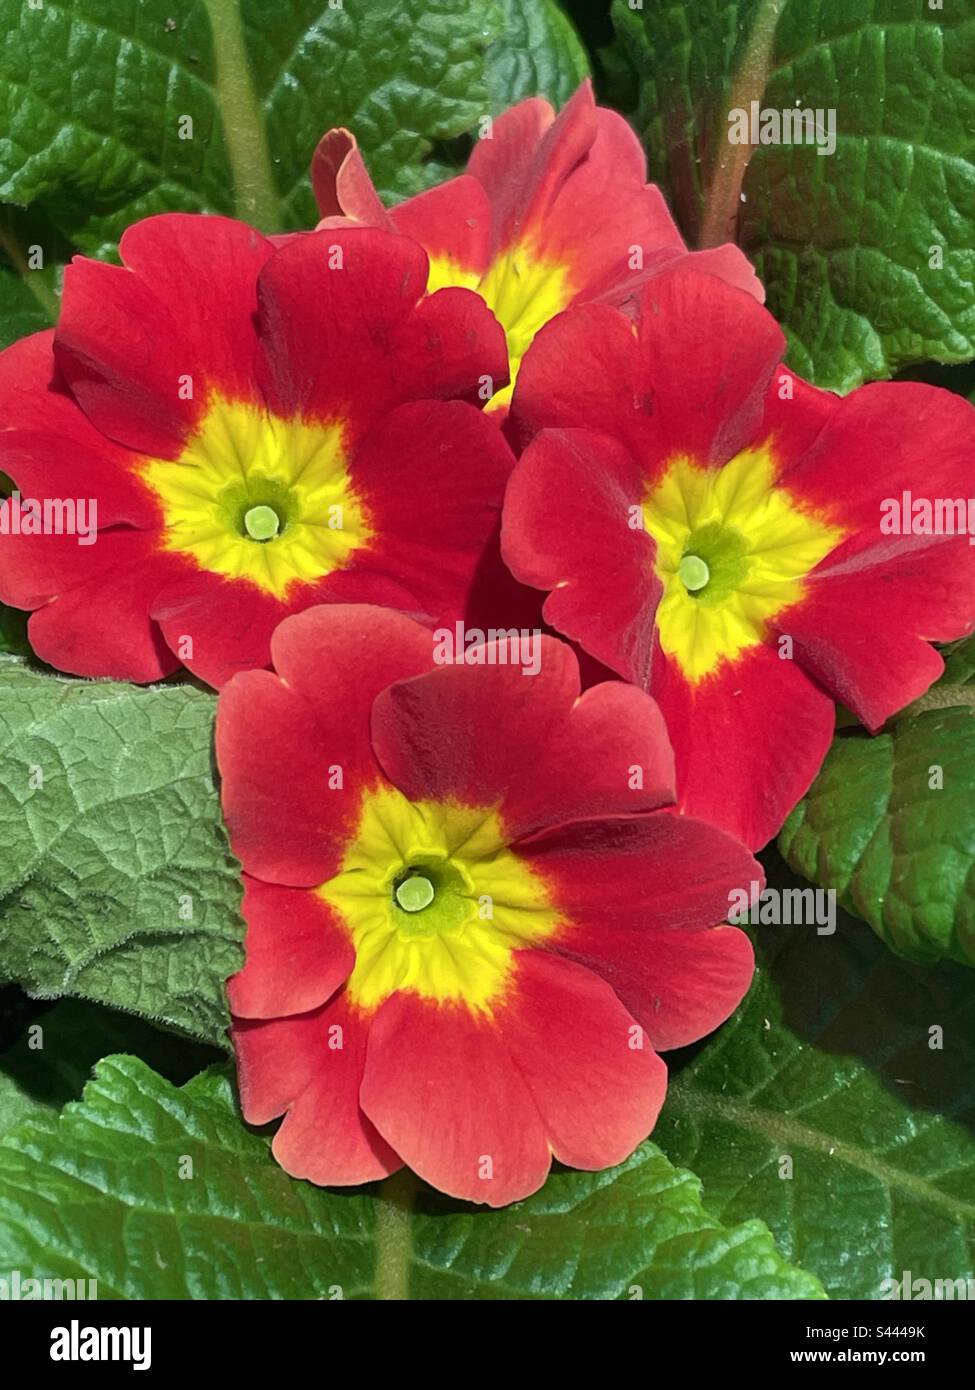 Gorgeous and bright red and yellow blooms every gardener wants Stock Photo